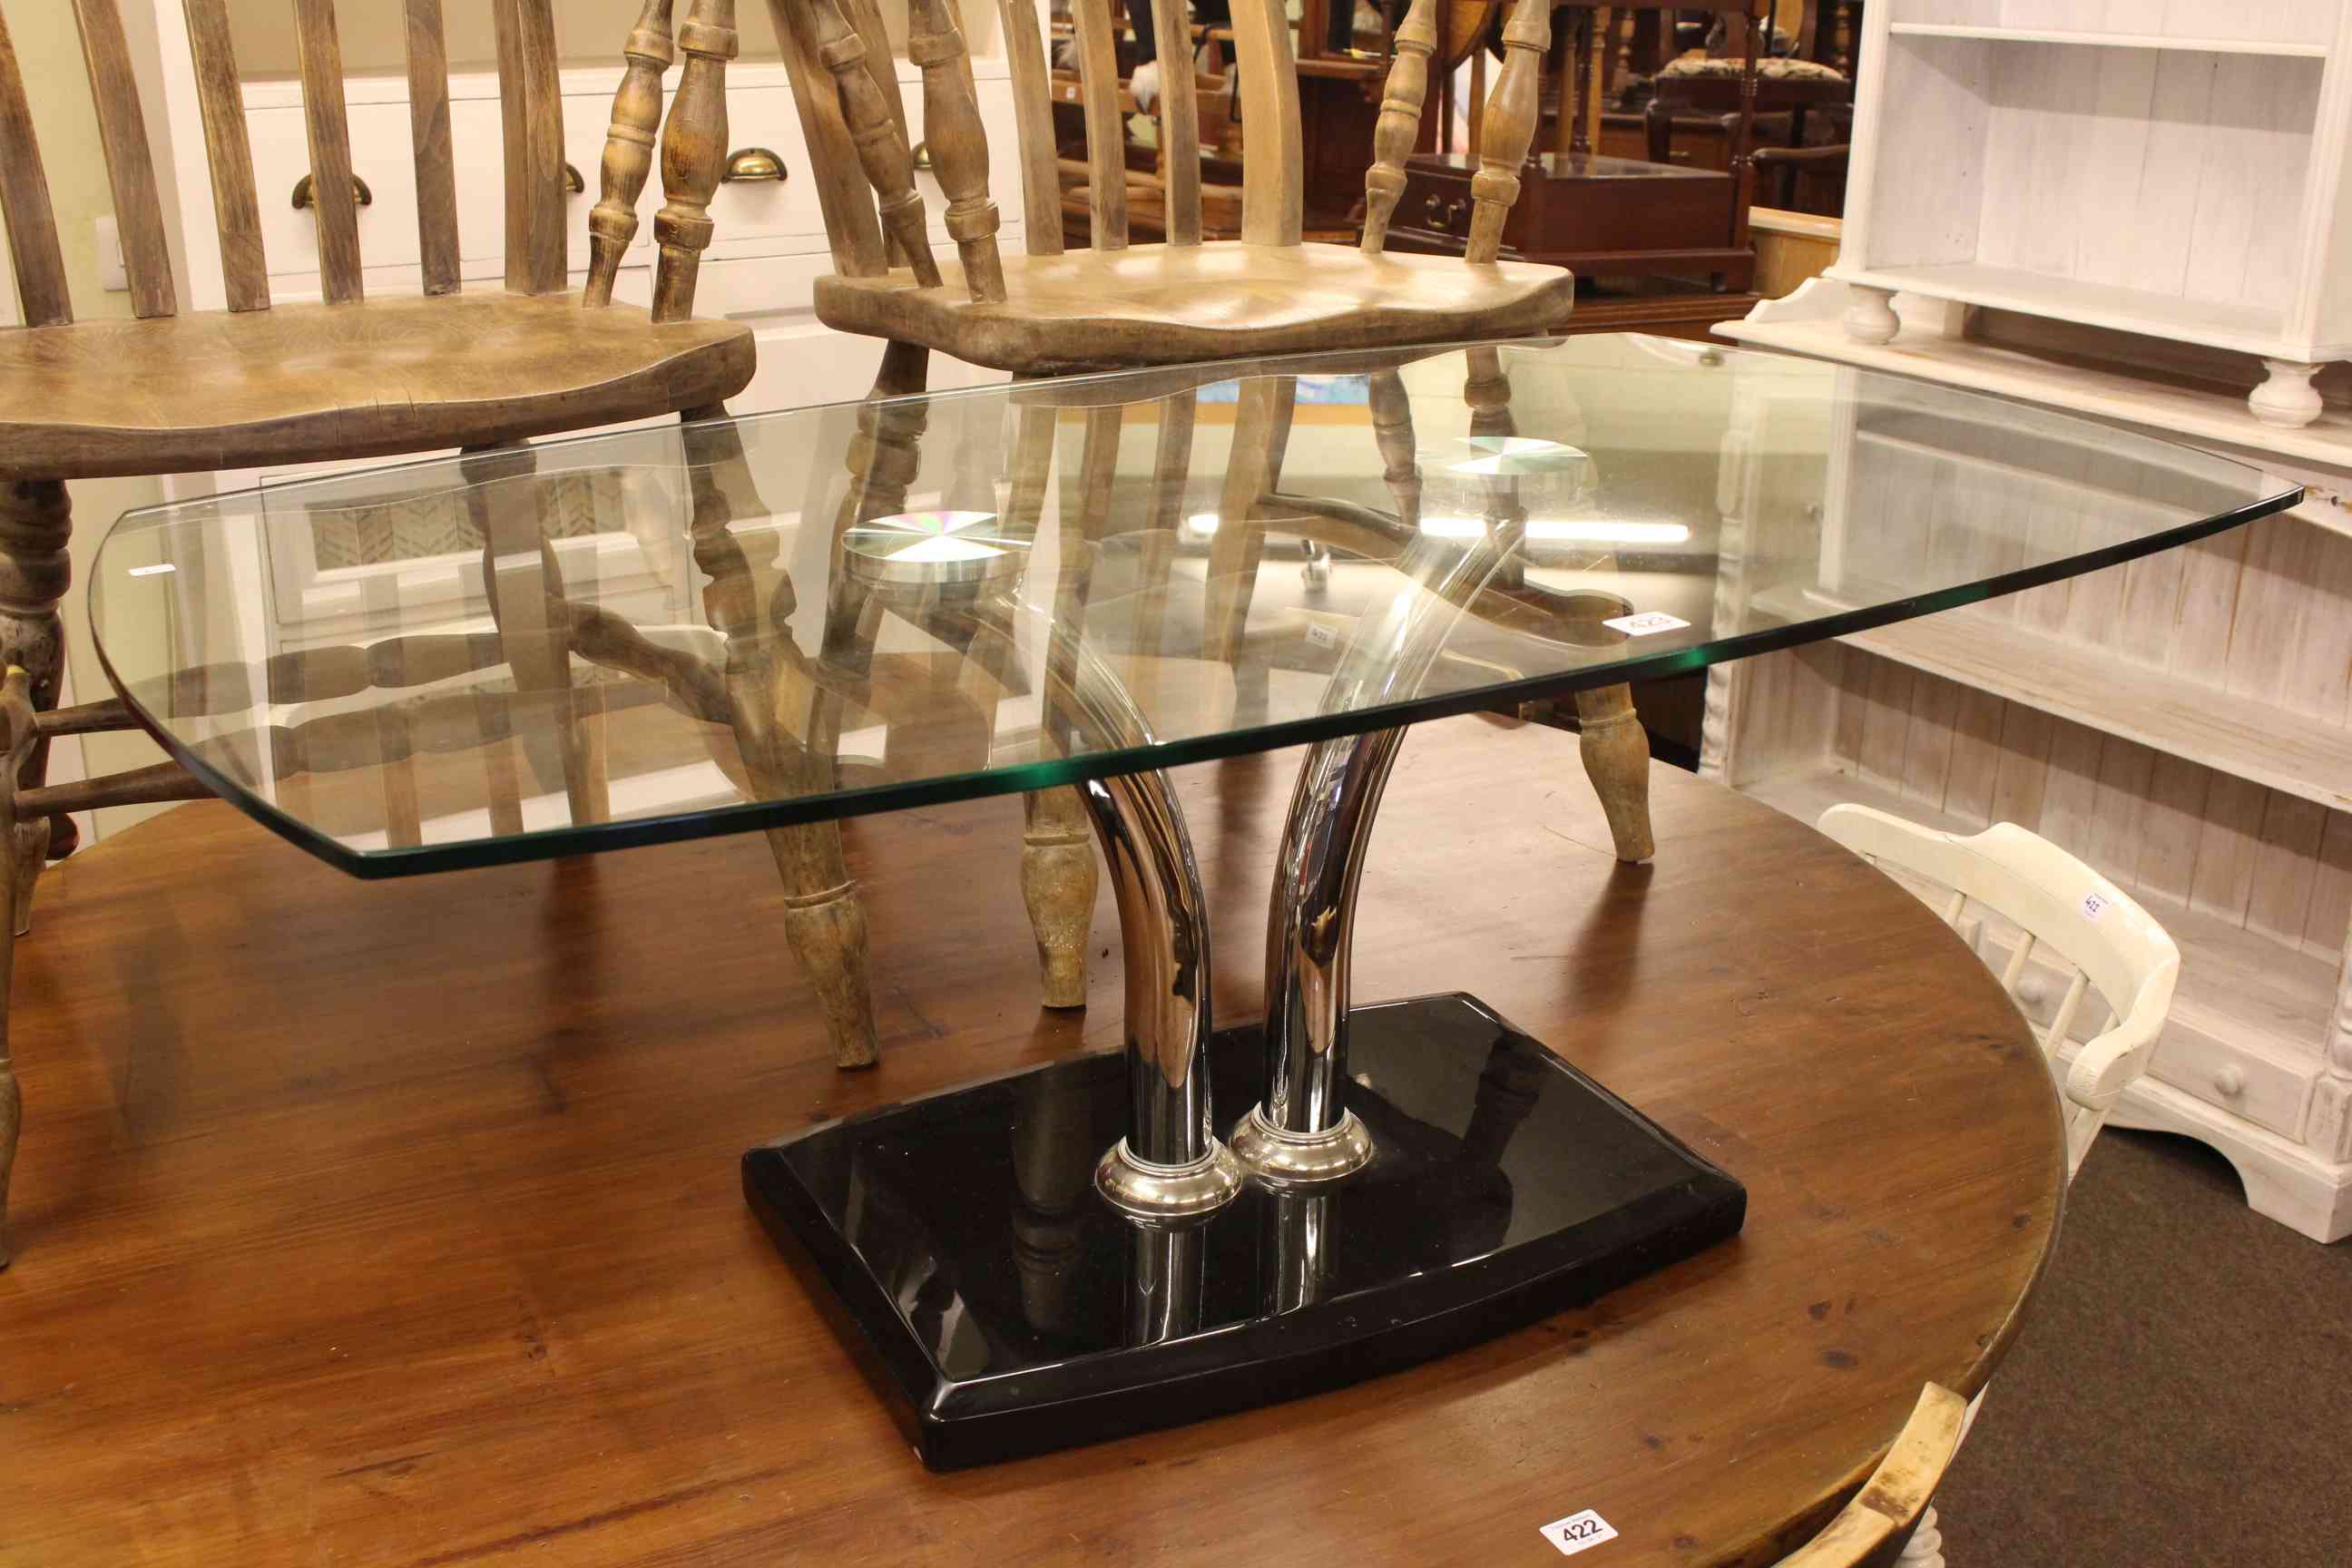 Contemporary rectangular glass topped coffee table, 43cm high by 110cm long by 65cm wide.